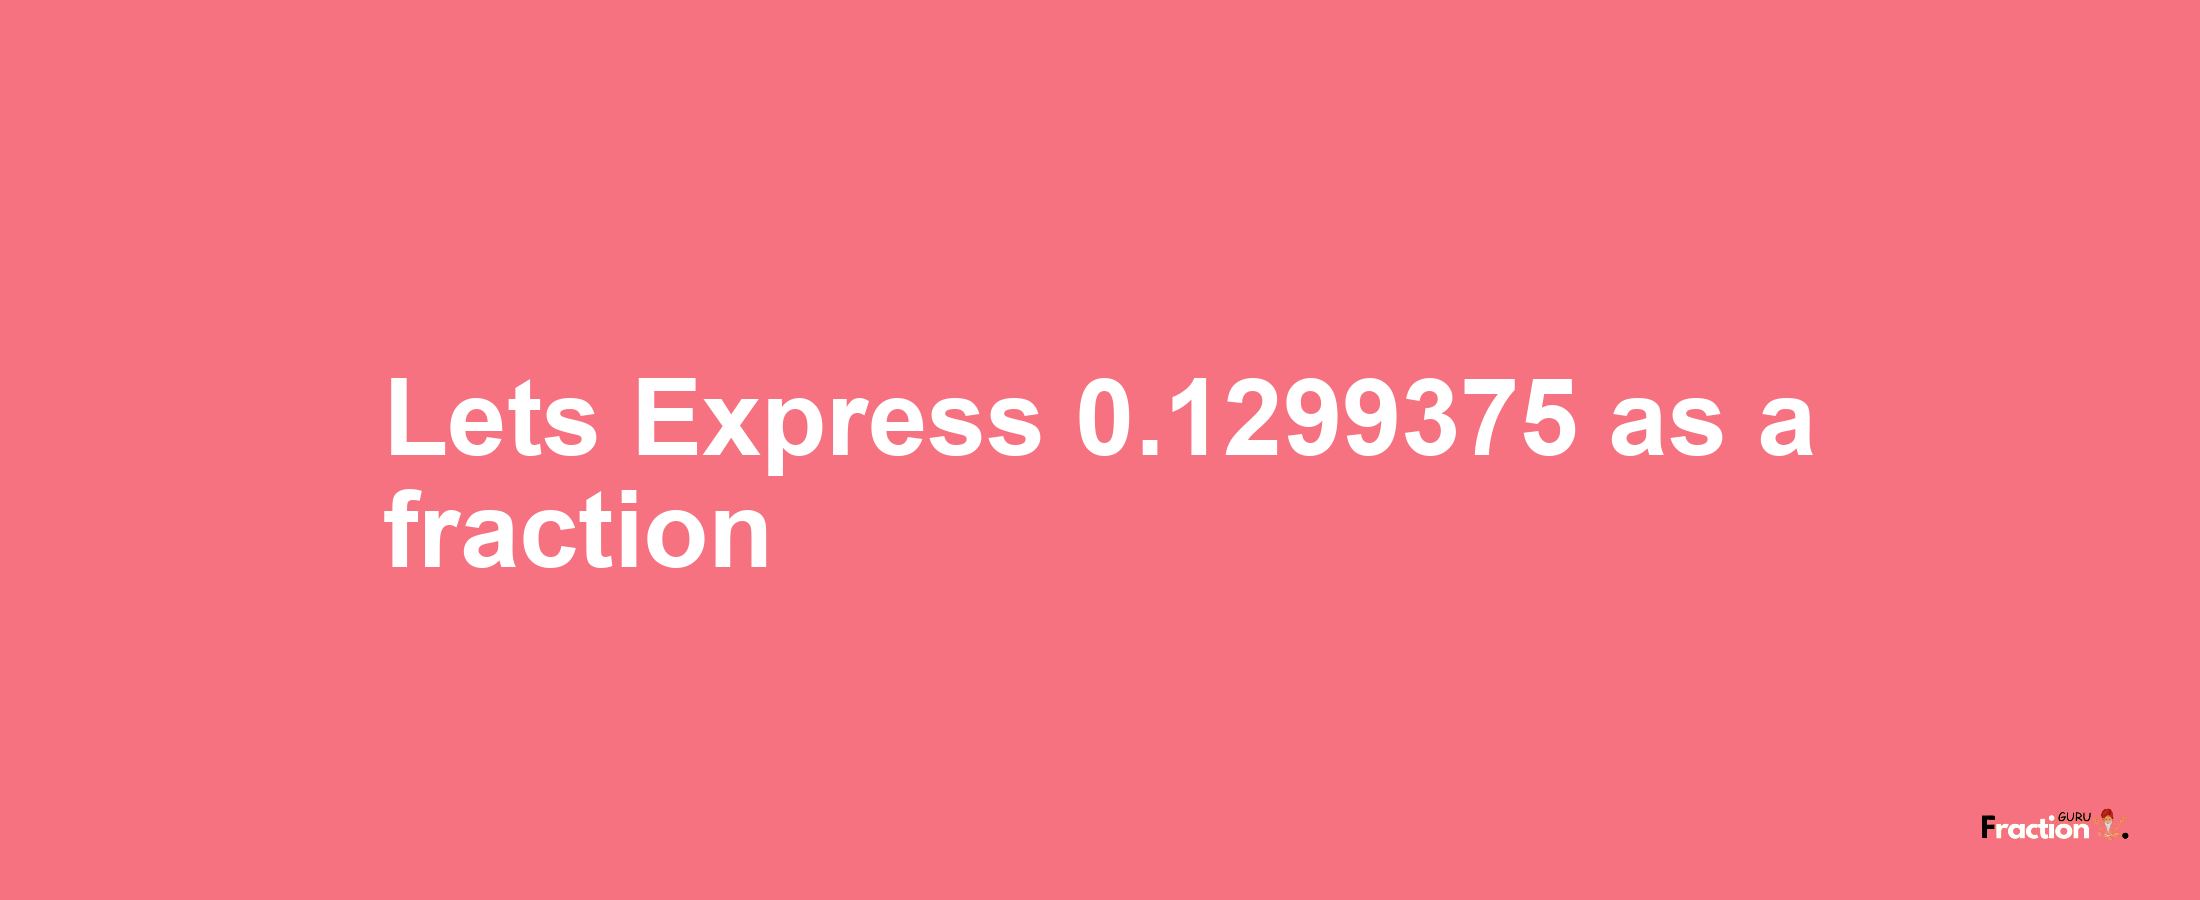 Lets Express 0.1299375 as afraction